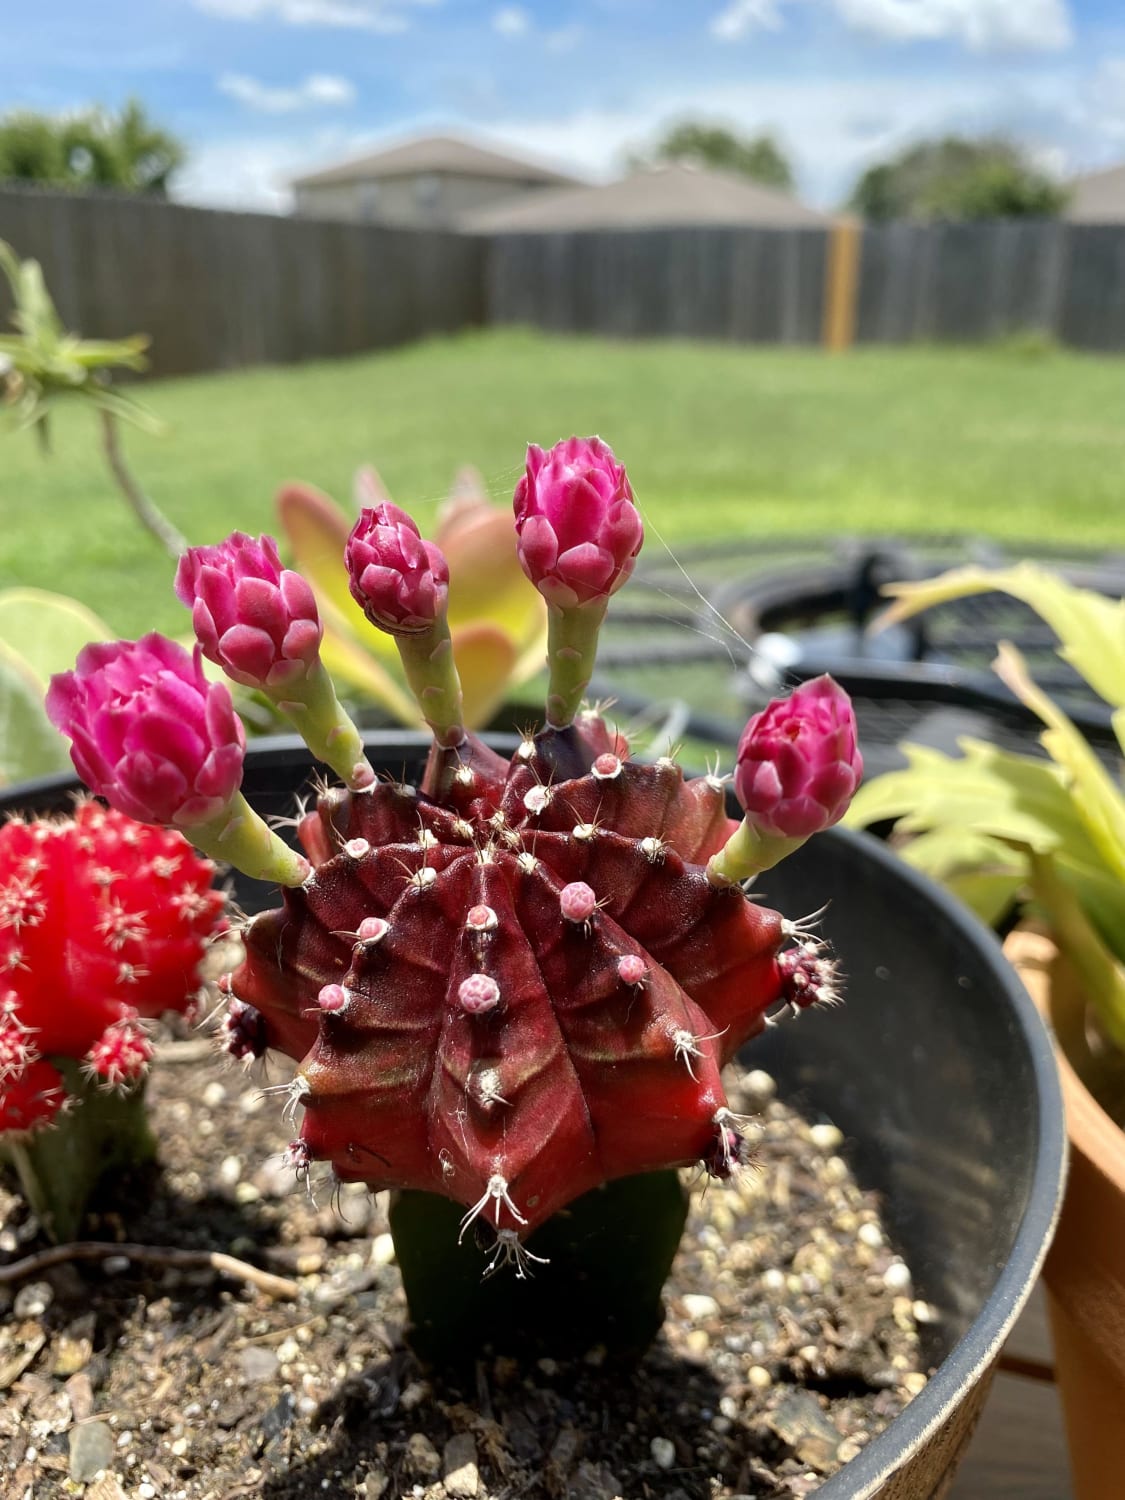 This absolute unit started blooming. Can a moon cactus be saved from eventual grafting death? Help.